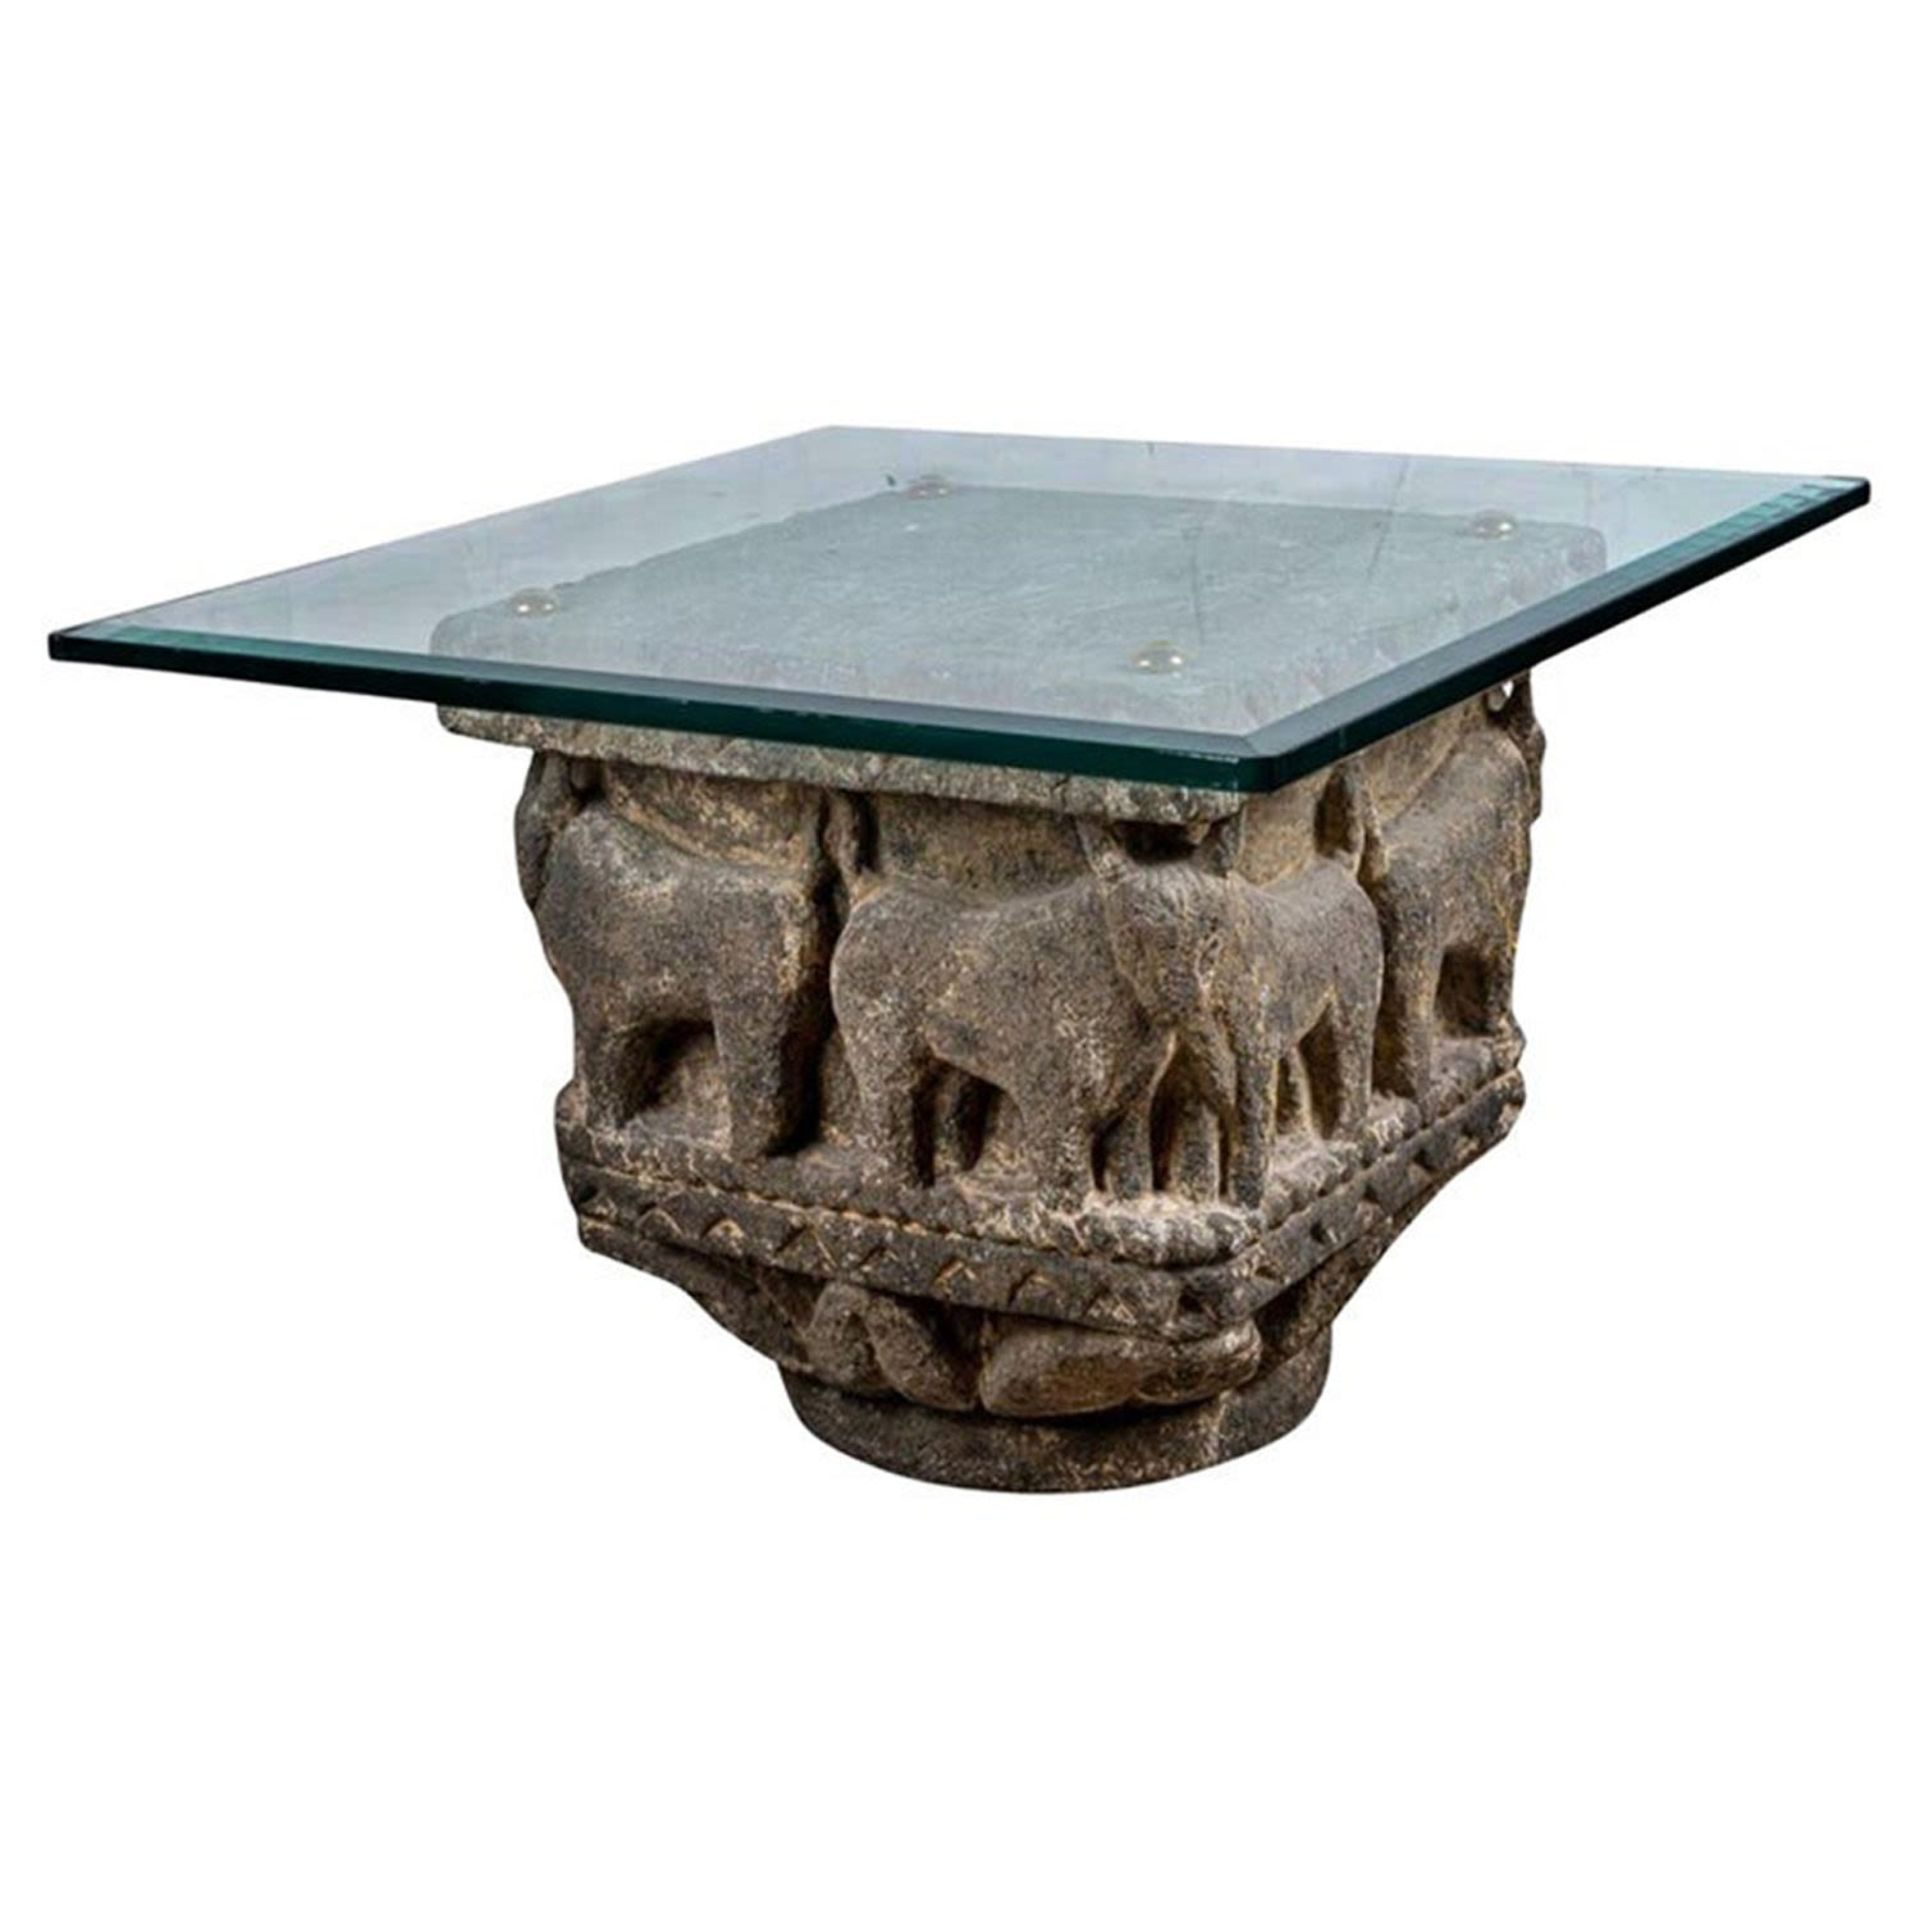 Italian capitello from the 17th century adapted to a table, in carved stone